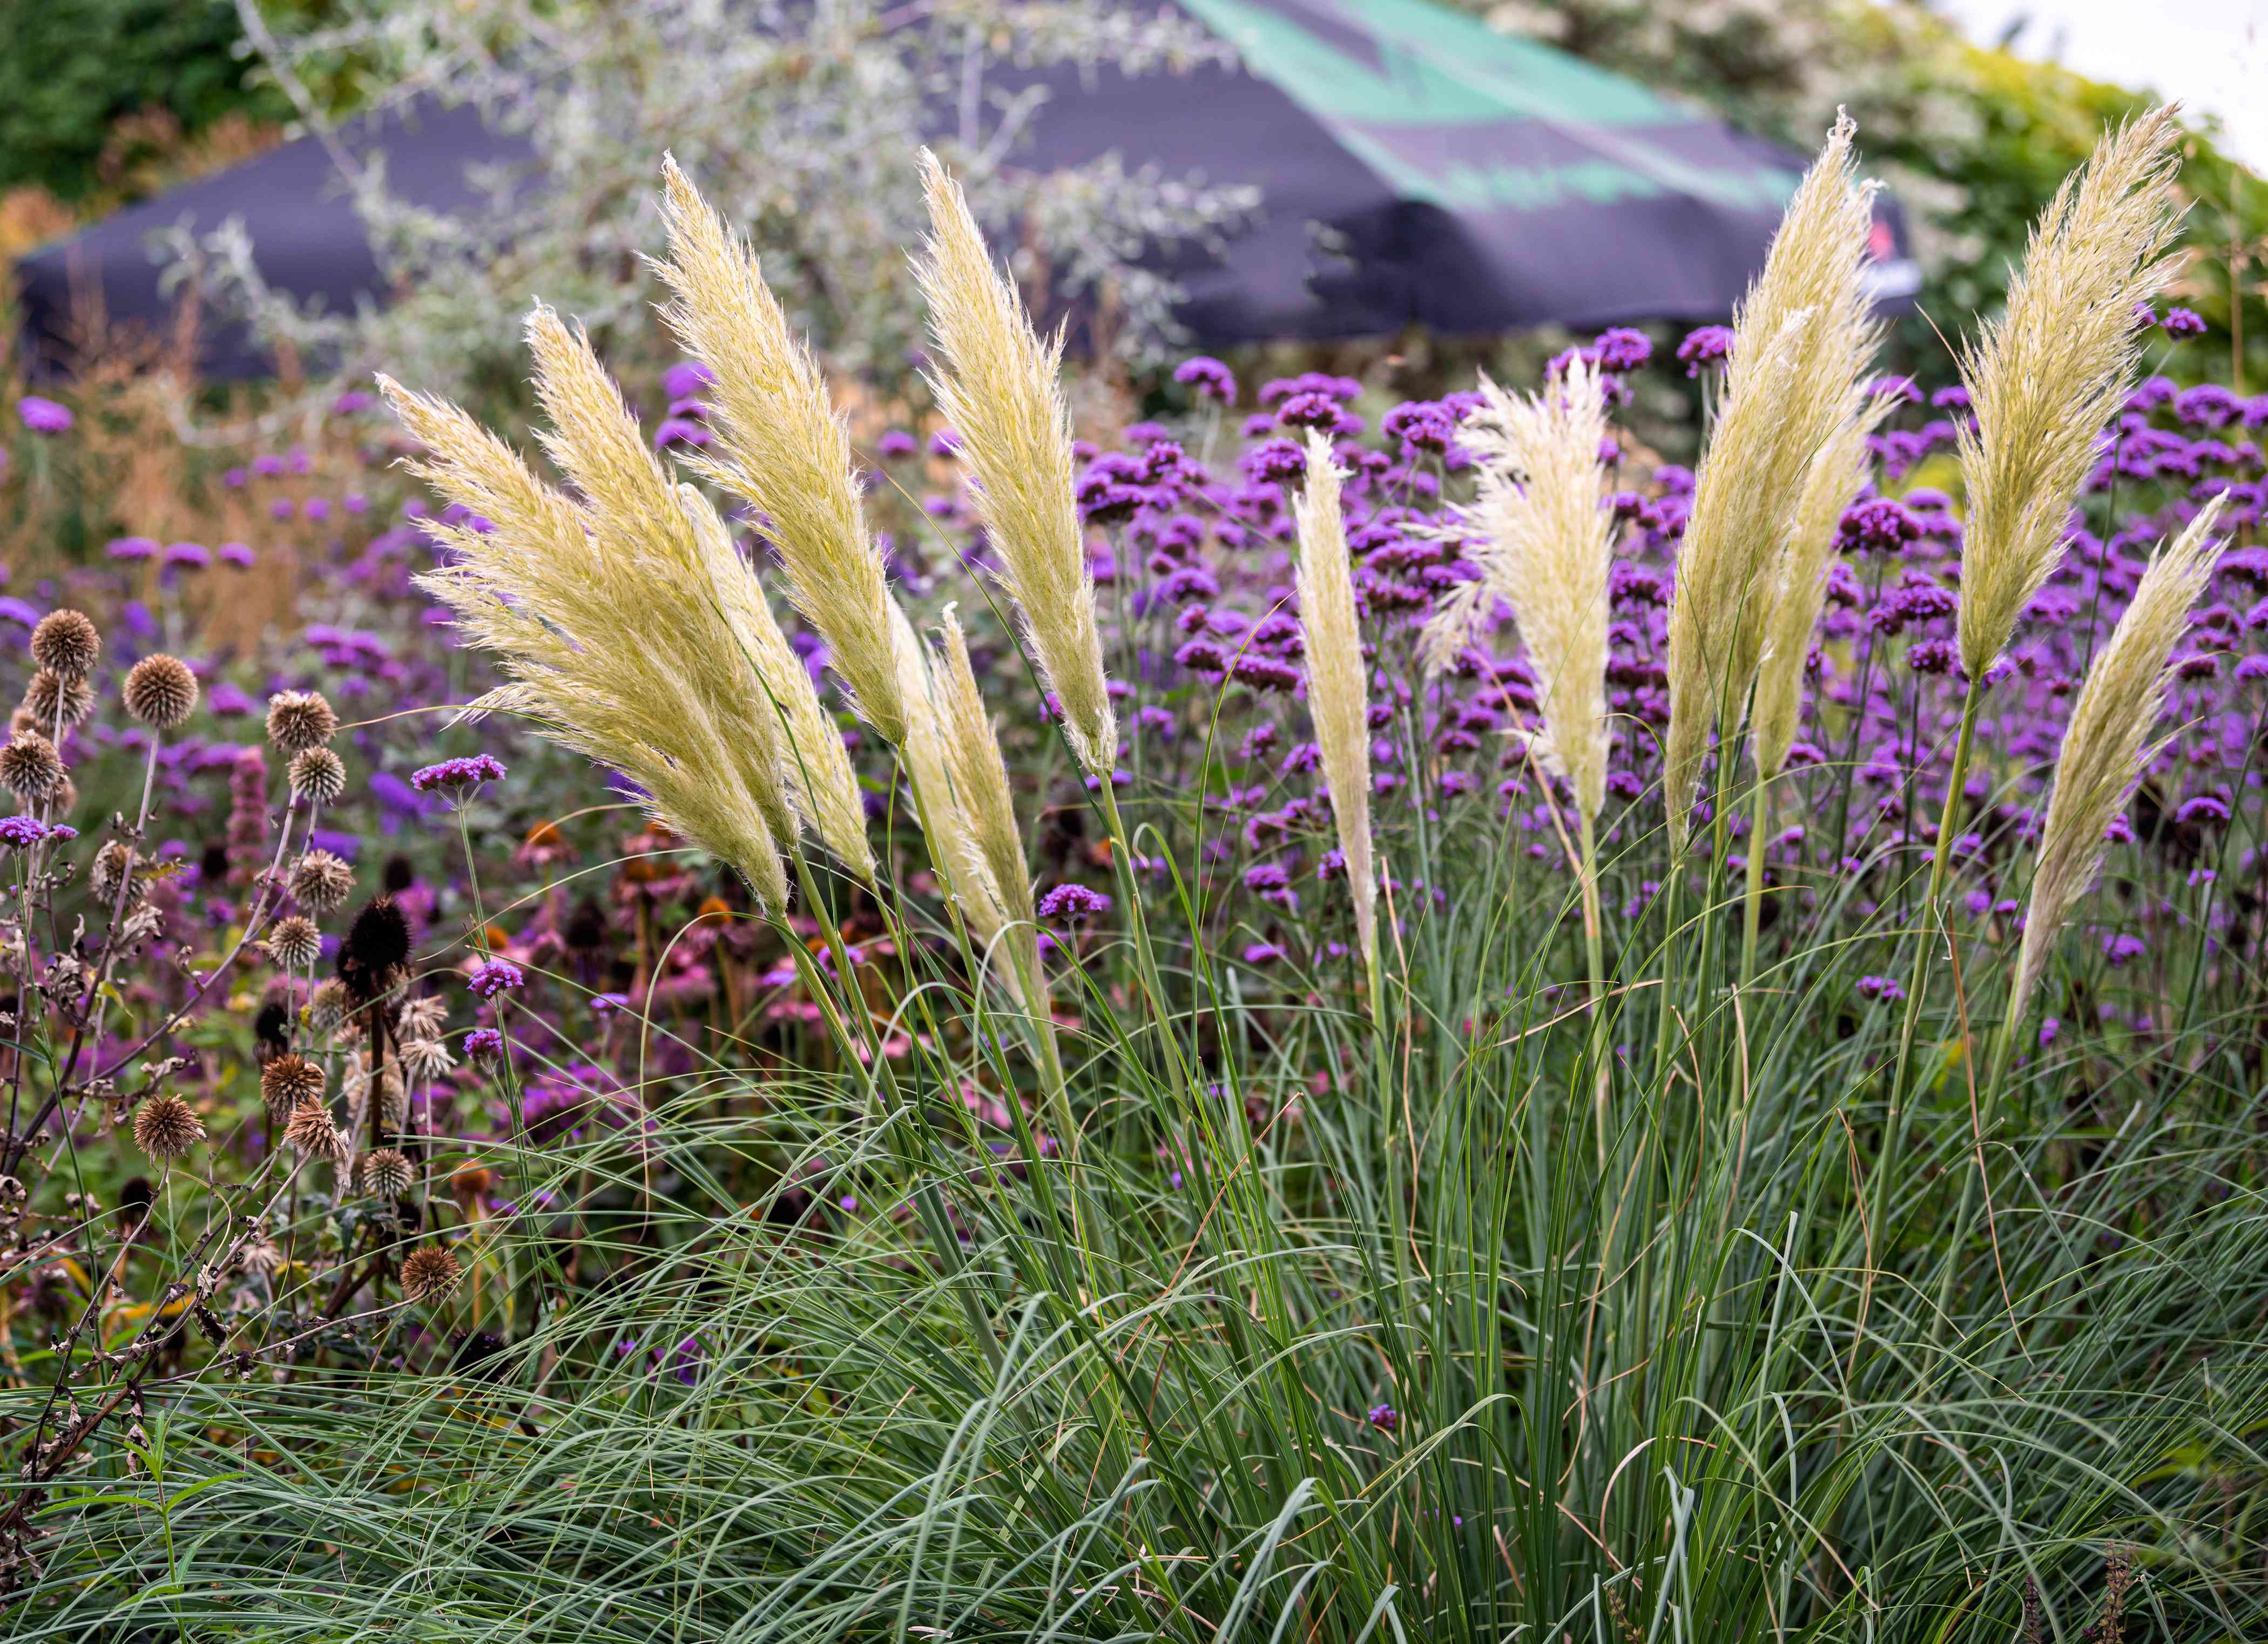 When to plant pampas grass